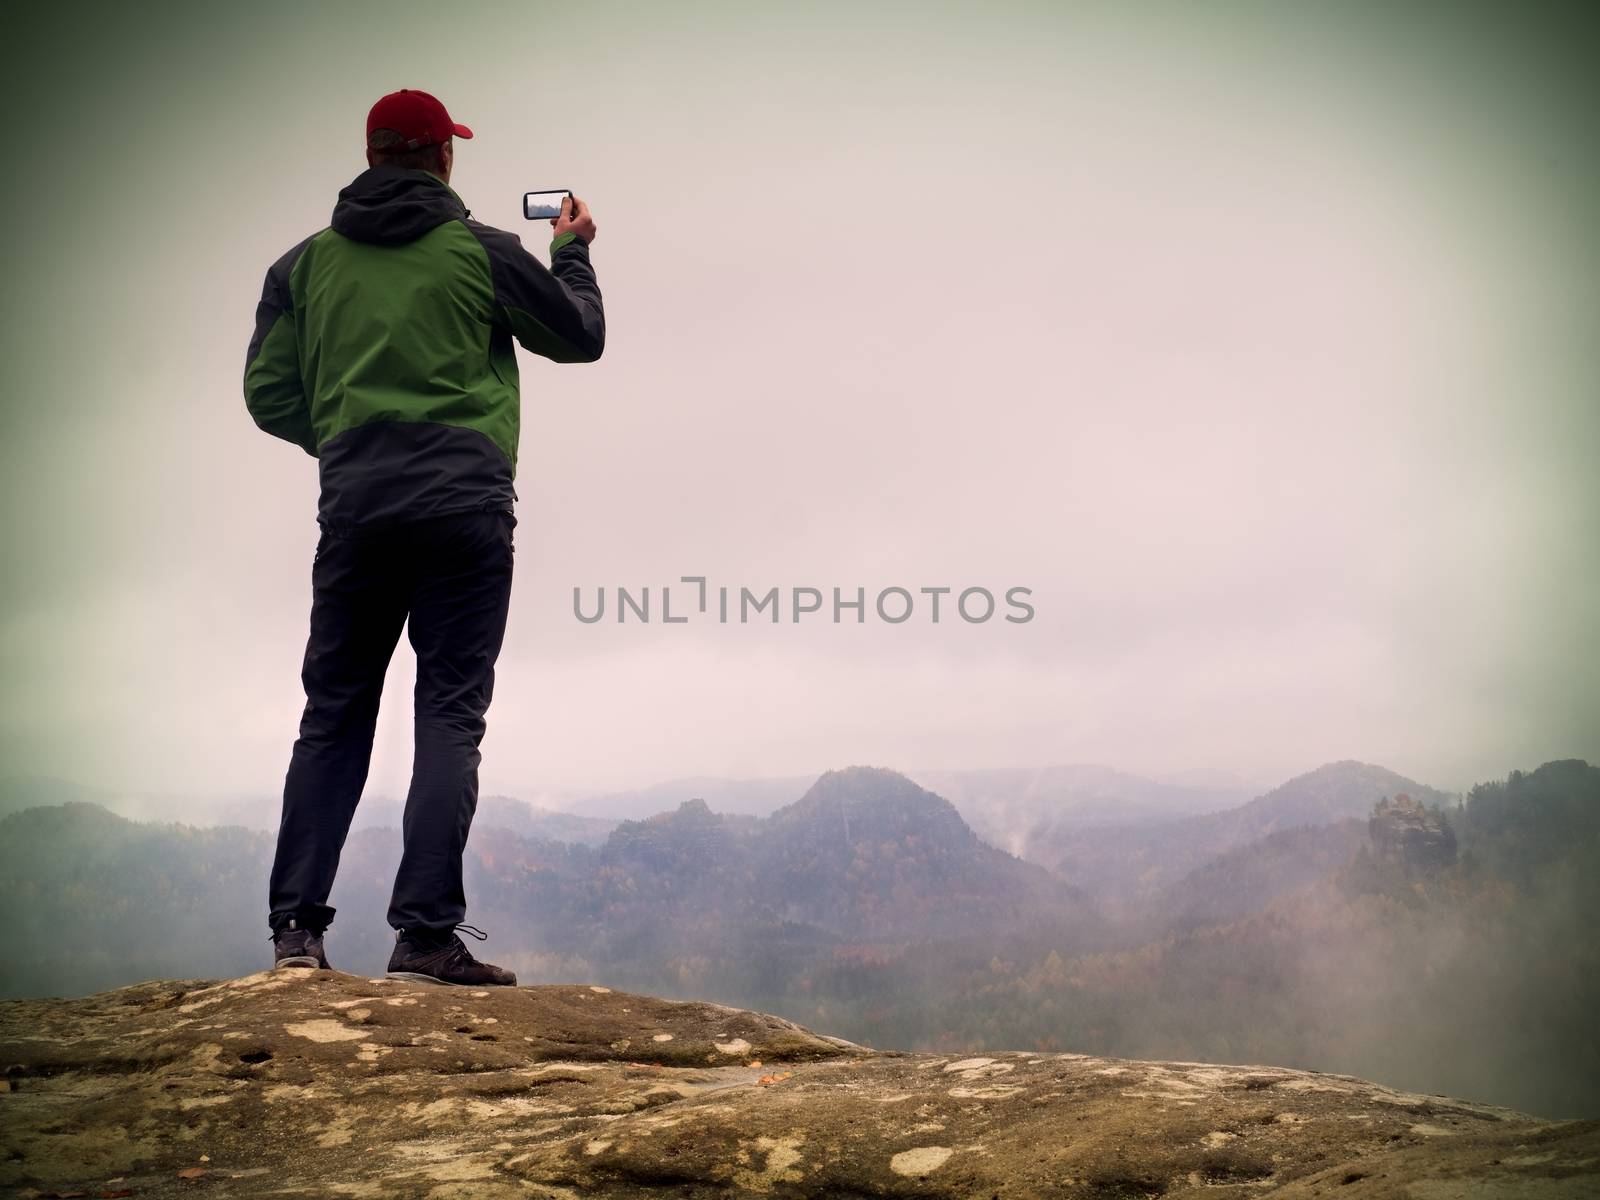 Man photography by phone. Trip in  mountains, sharp rock empire by rdonar2